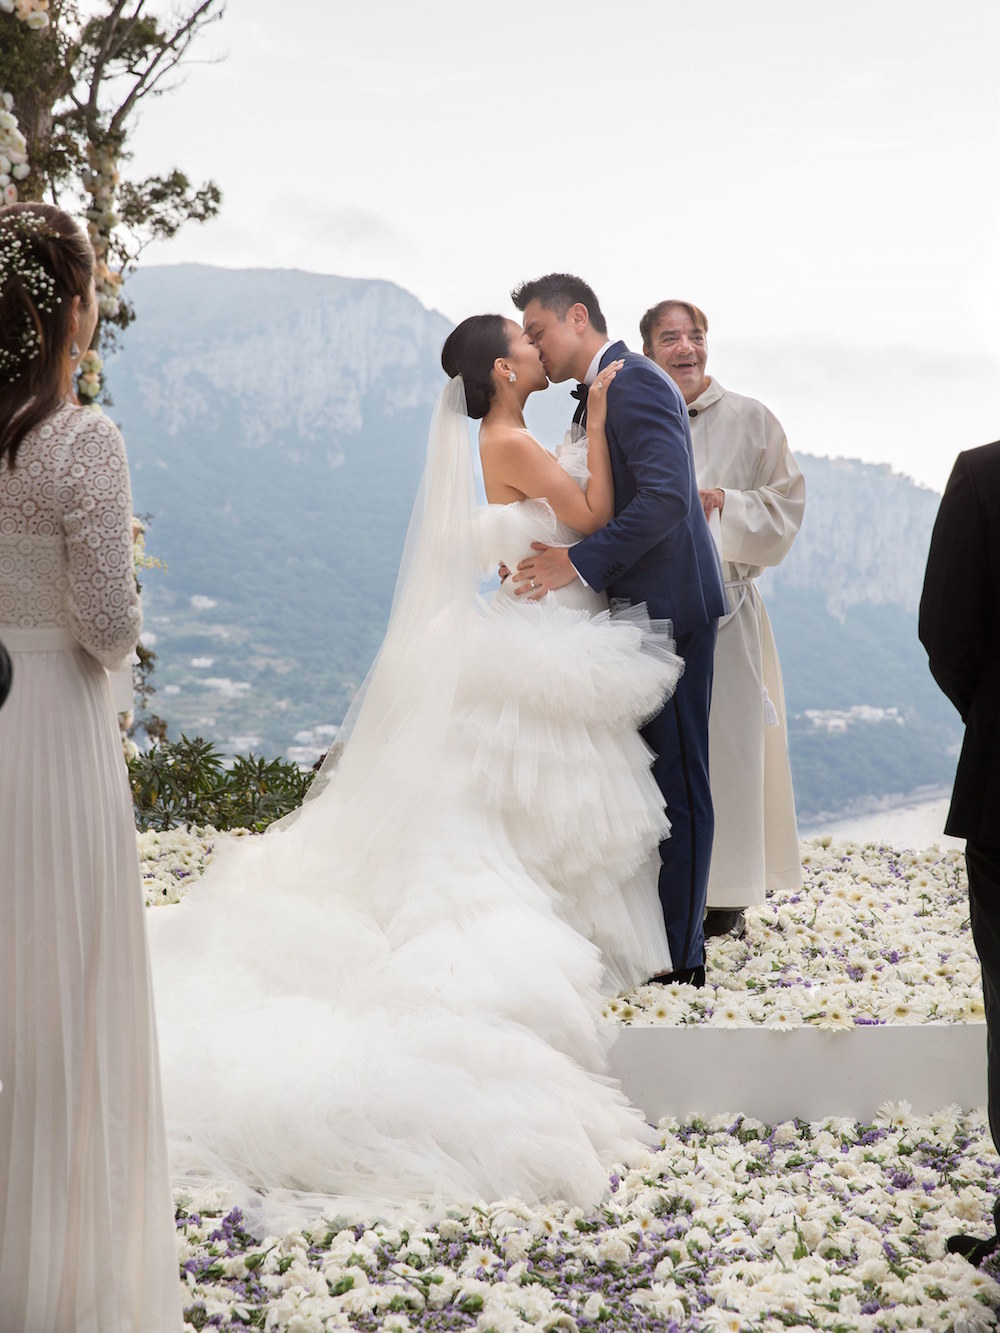 Feiping Chang and Lincoln Li's wedding in Capri (Photo: Vogue)